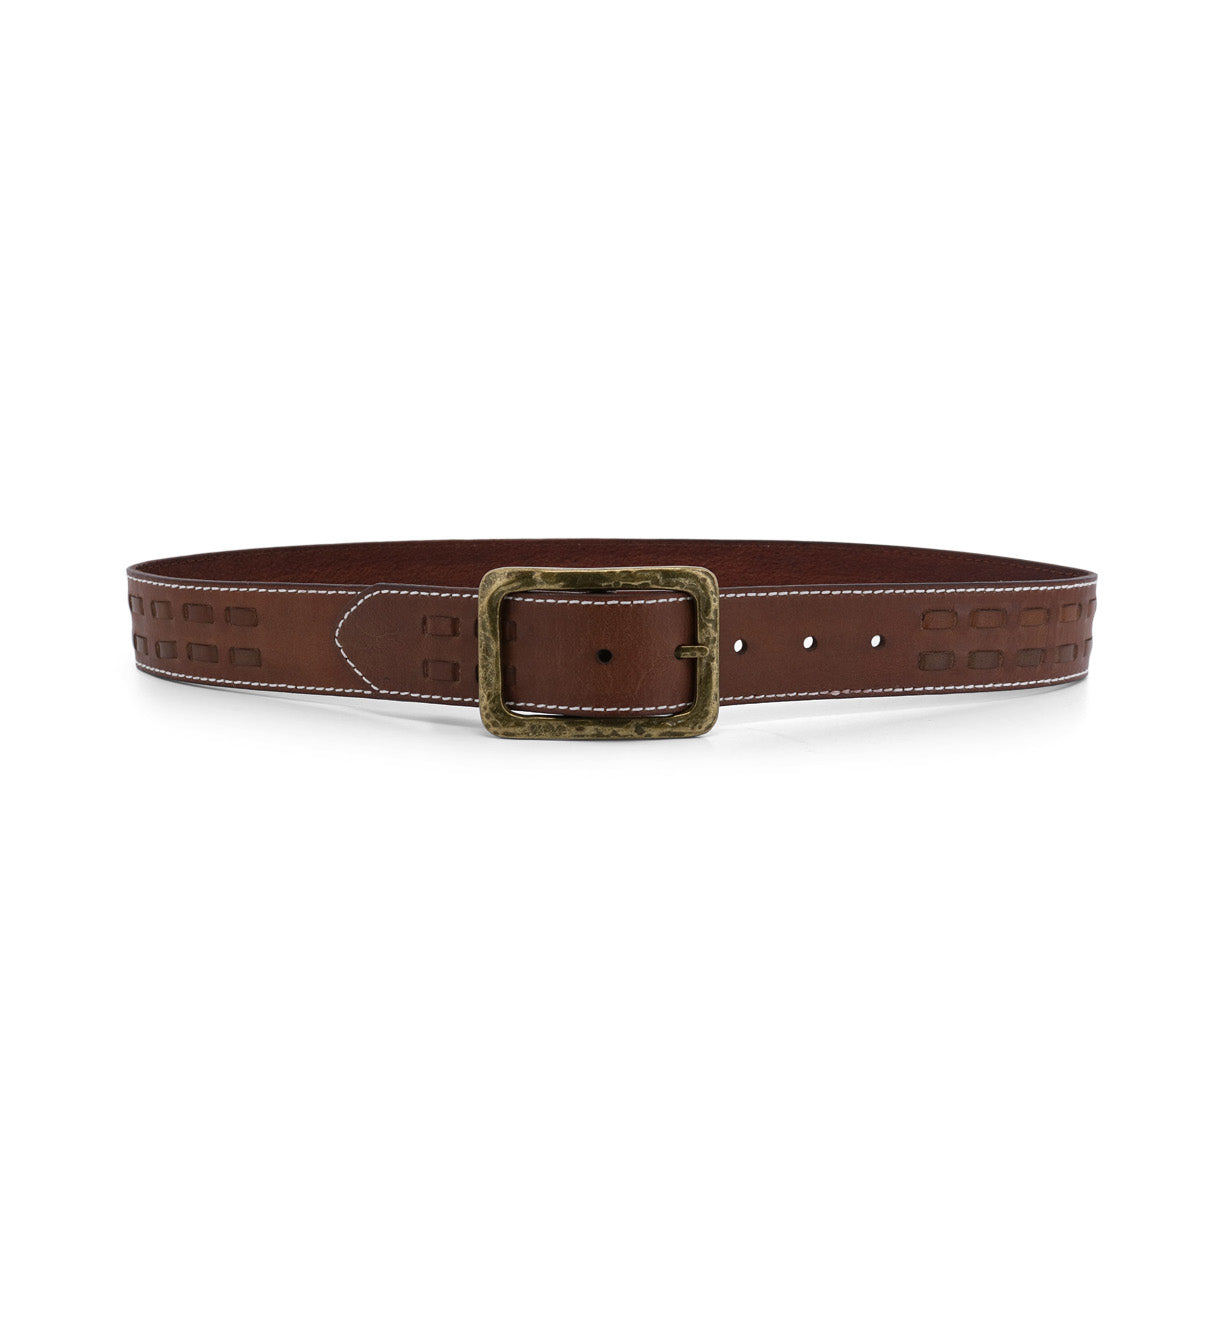 A Ross brown leather belt with a metal buckle from Bed Stu.